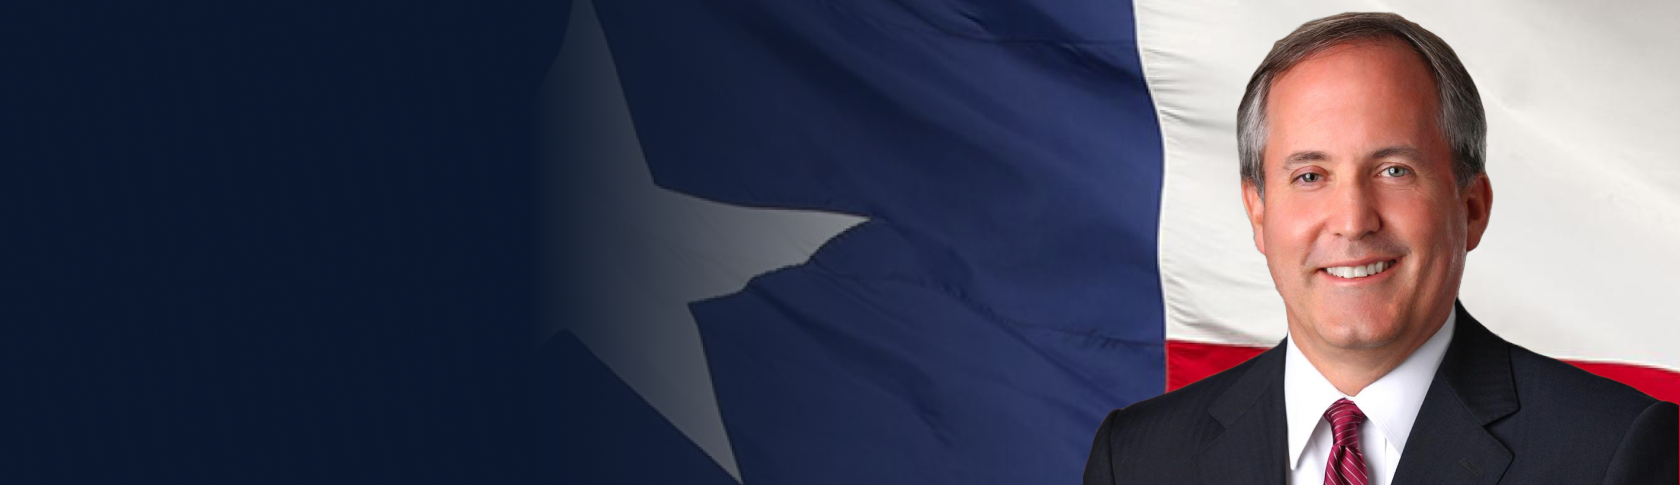 Ken Paxton in front of the Texas flag.